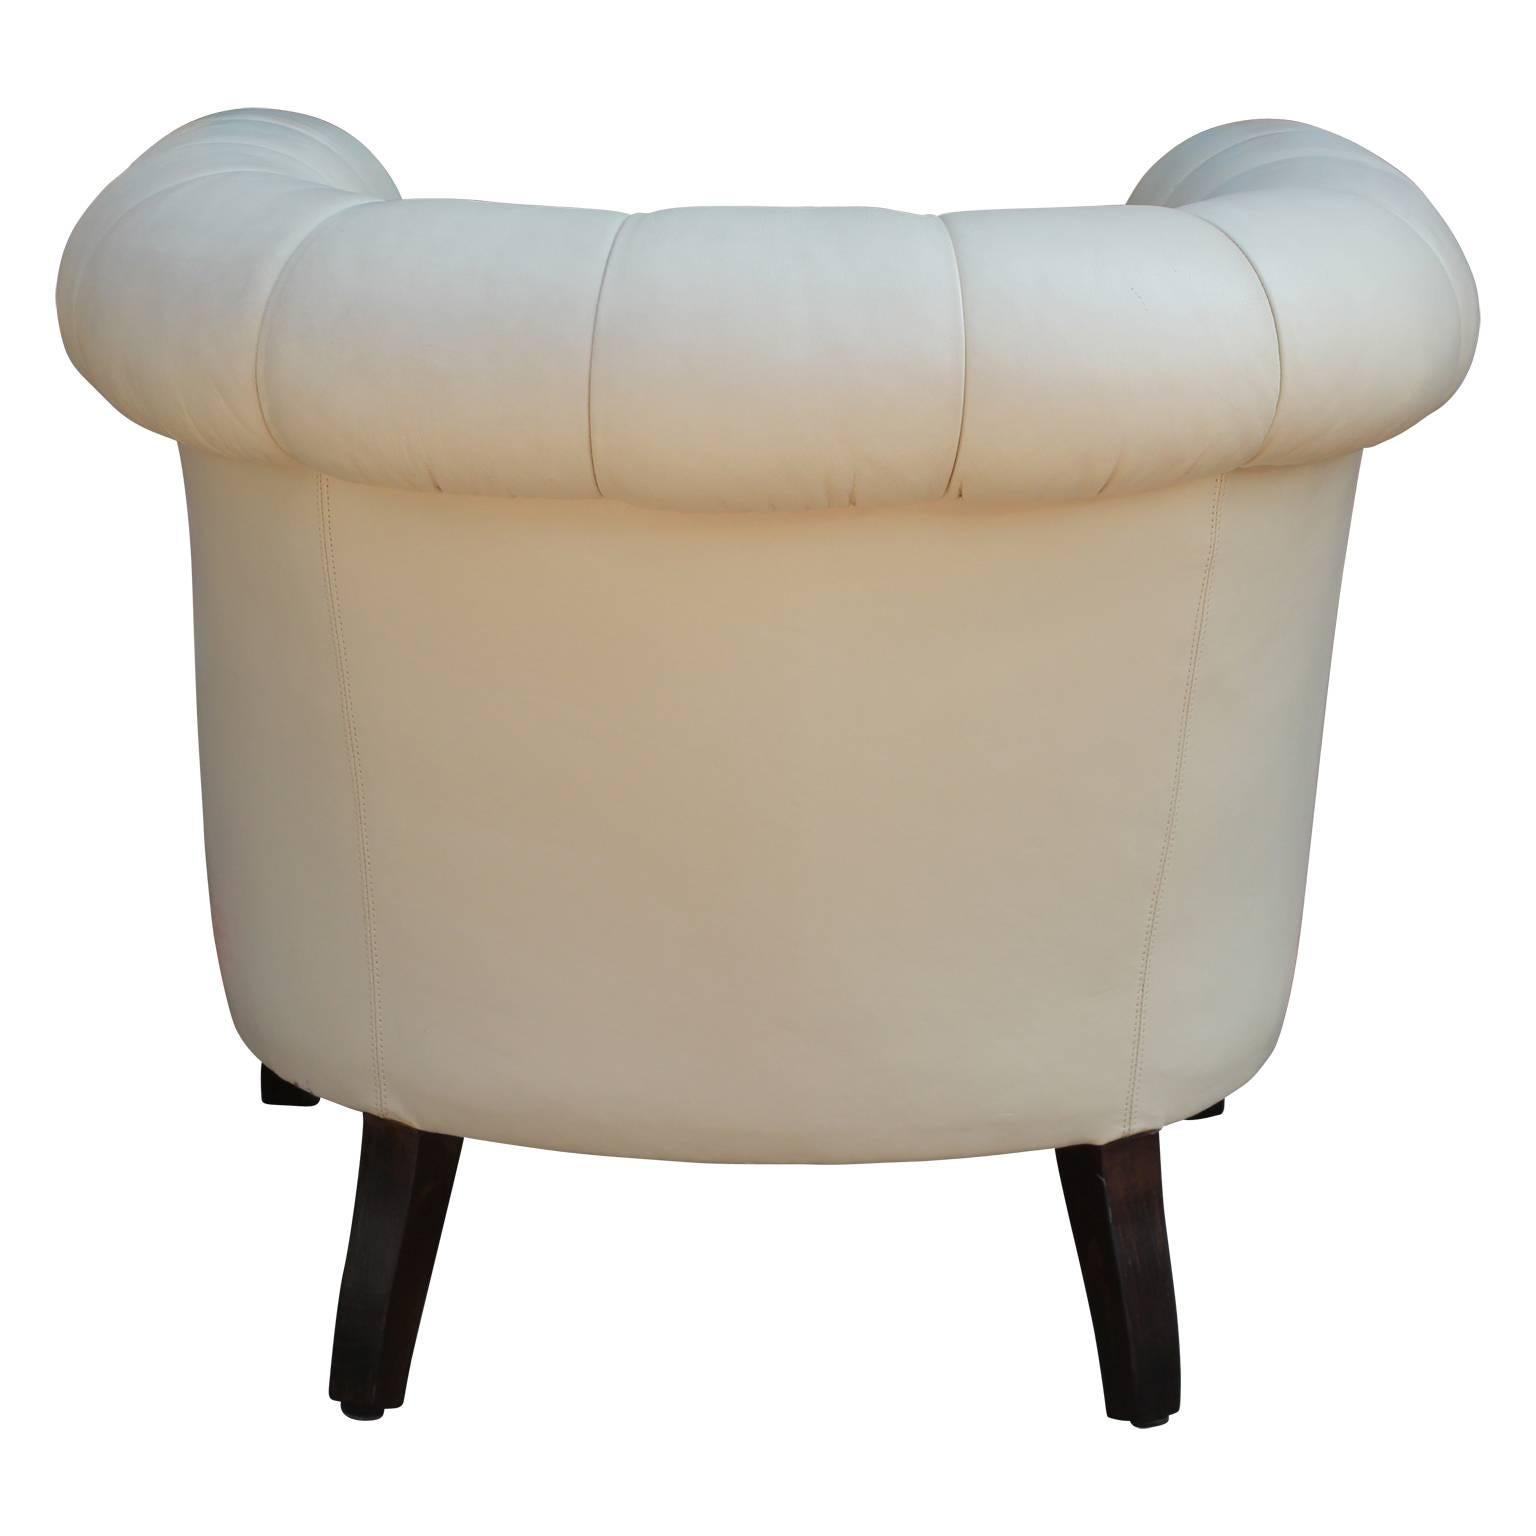 Pair of Hollywood Regency White Leather Tufted Chesterfield Style Lounge Chairs 1